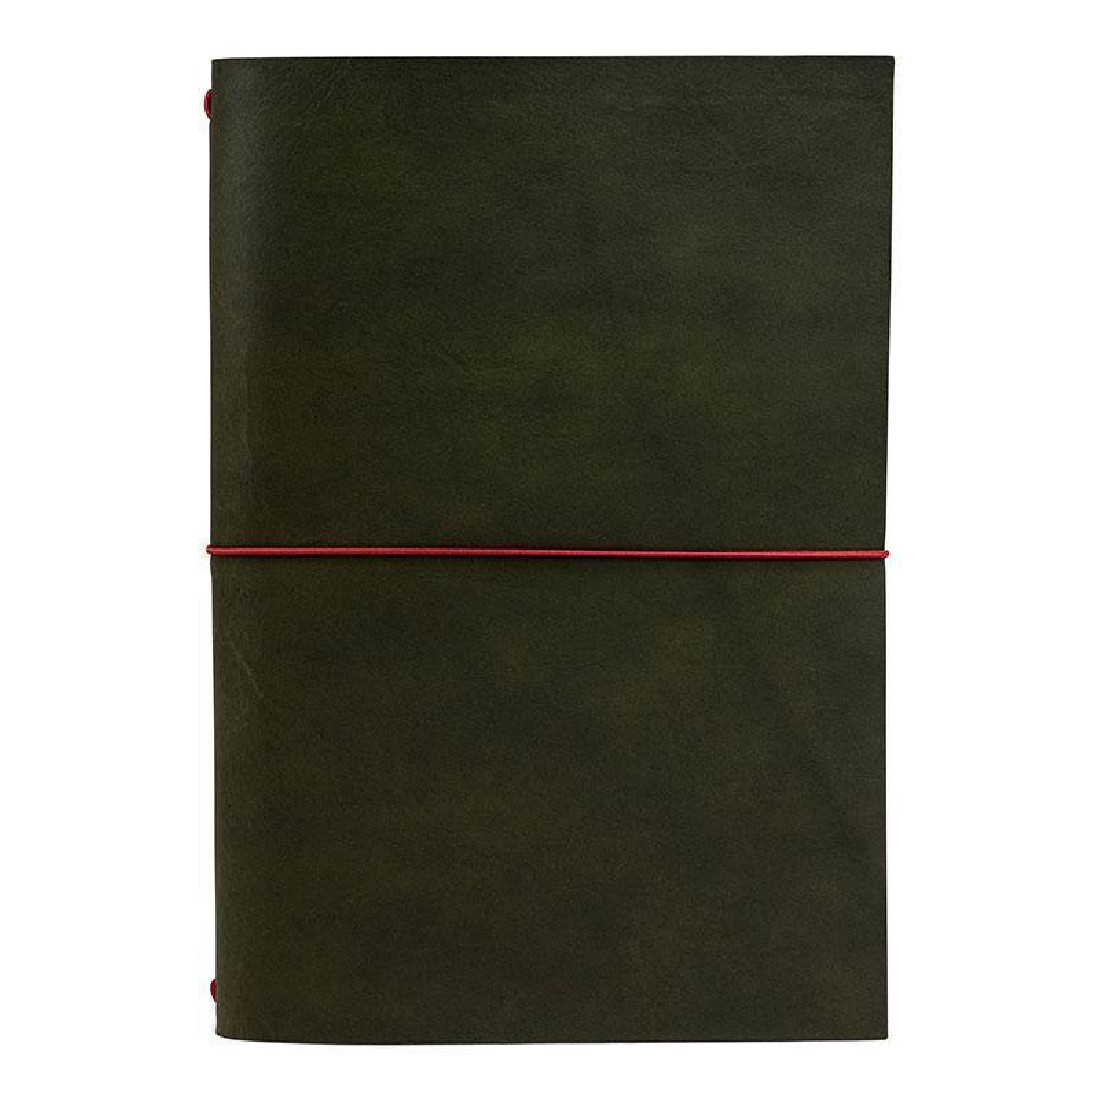 Paper Republic grand voyageur [xl] olive green leather journal